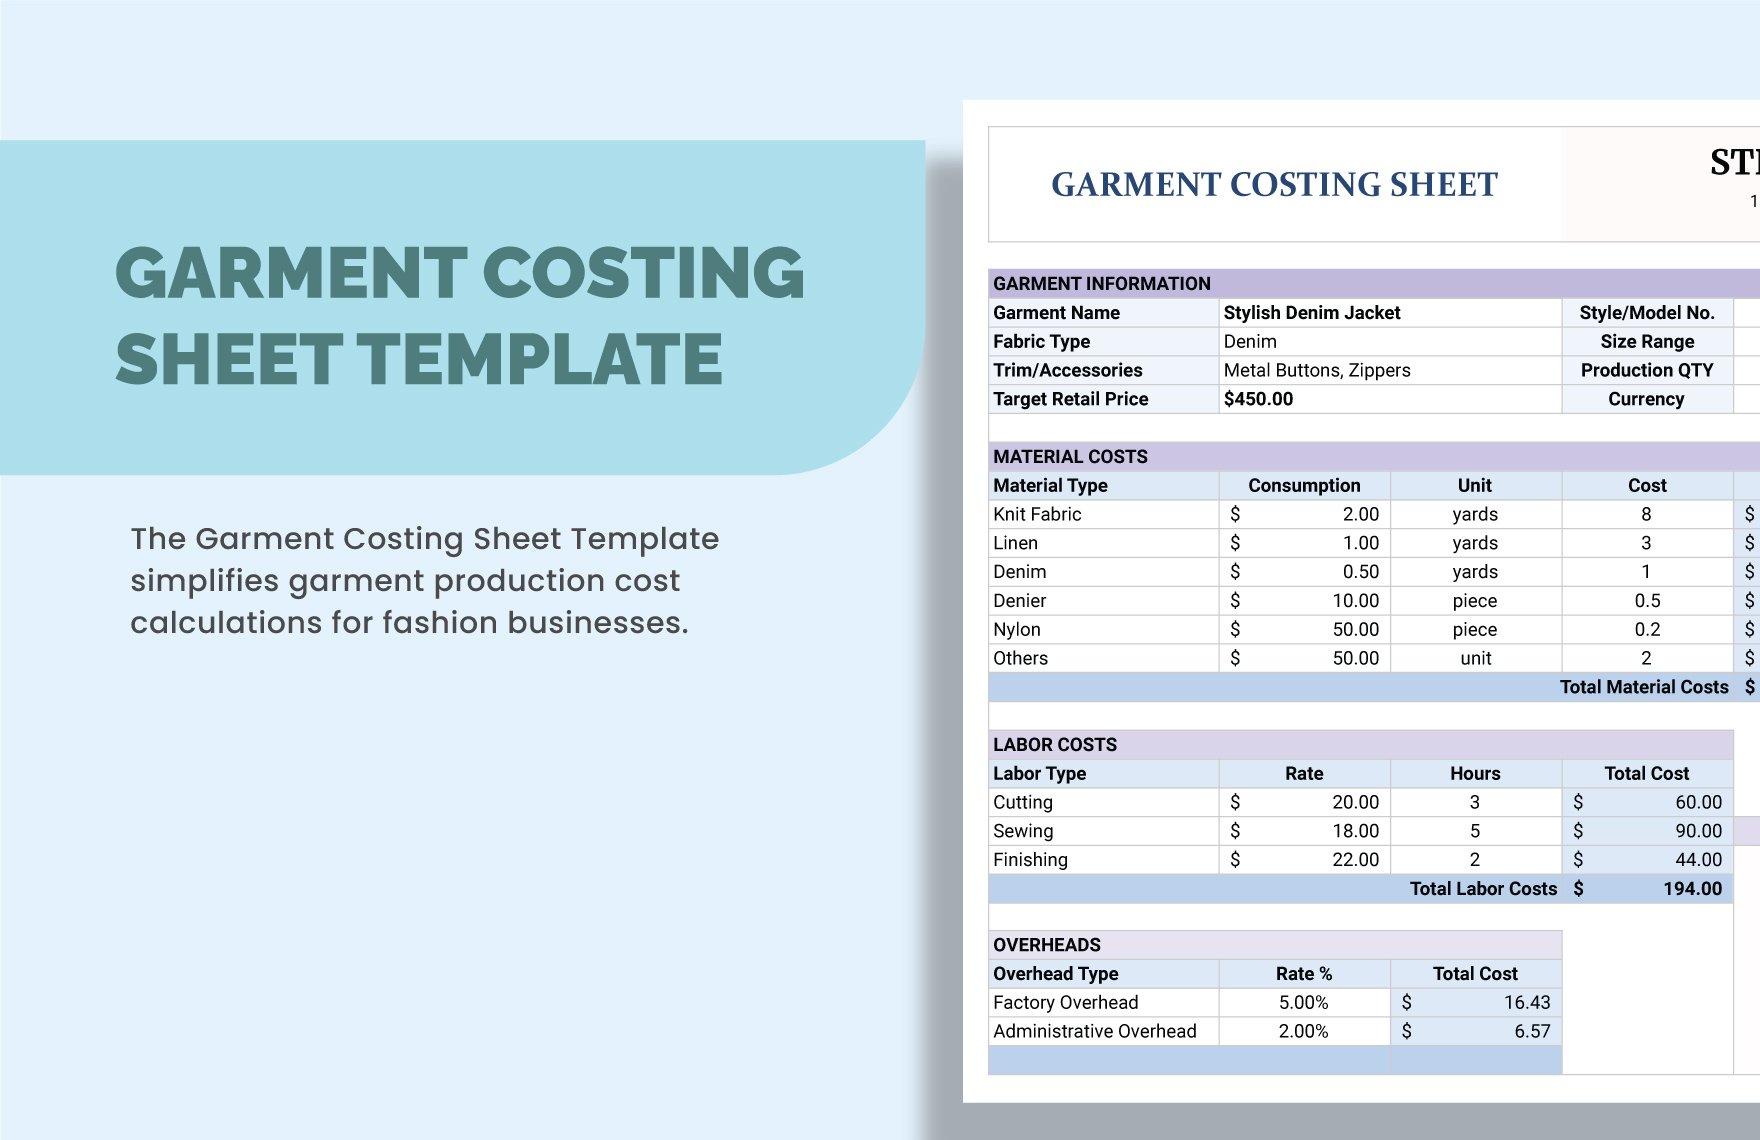 Garment Costing Sheet Template in Excel Google Sheets Download